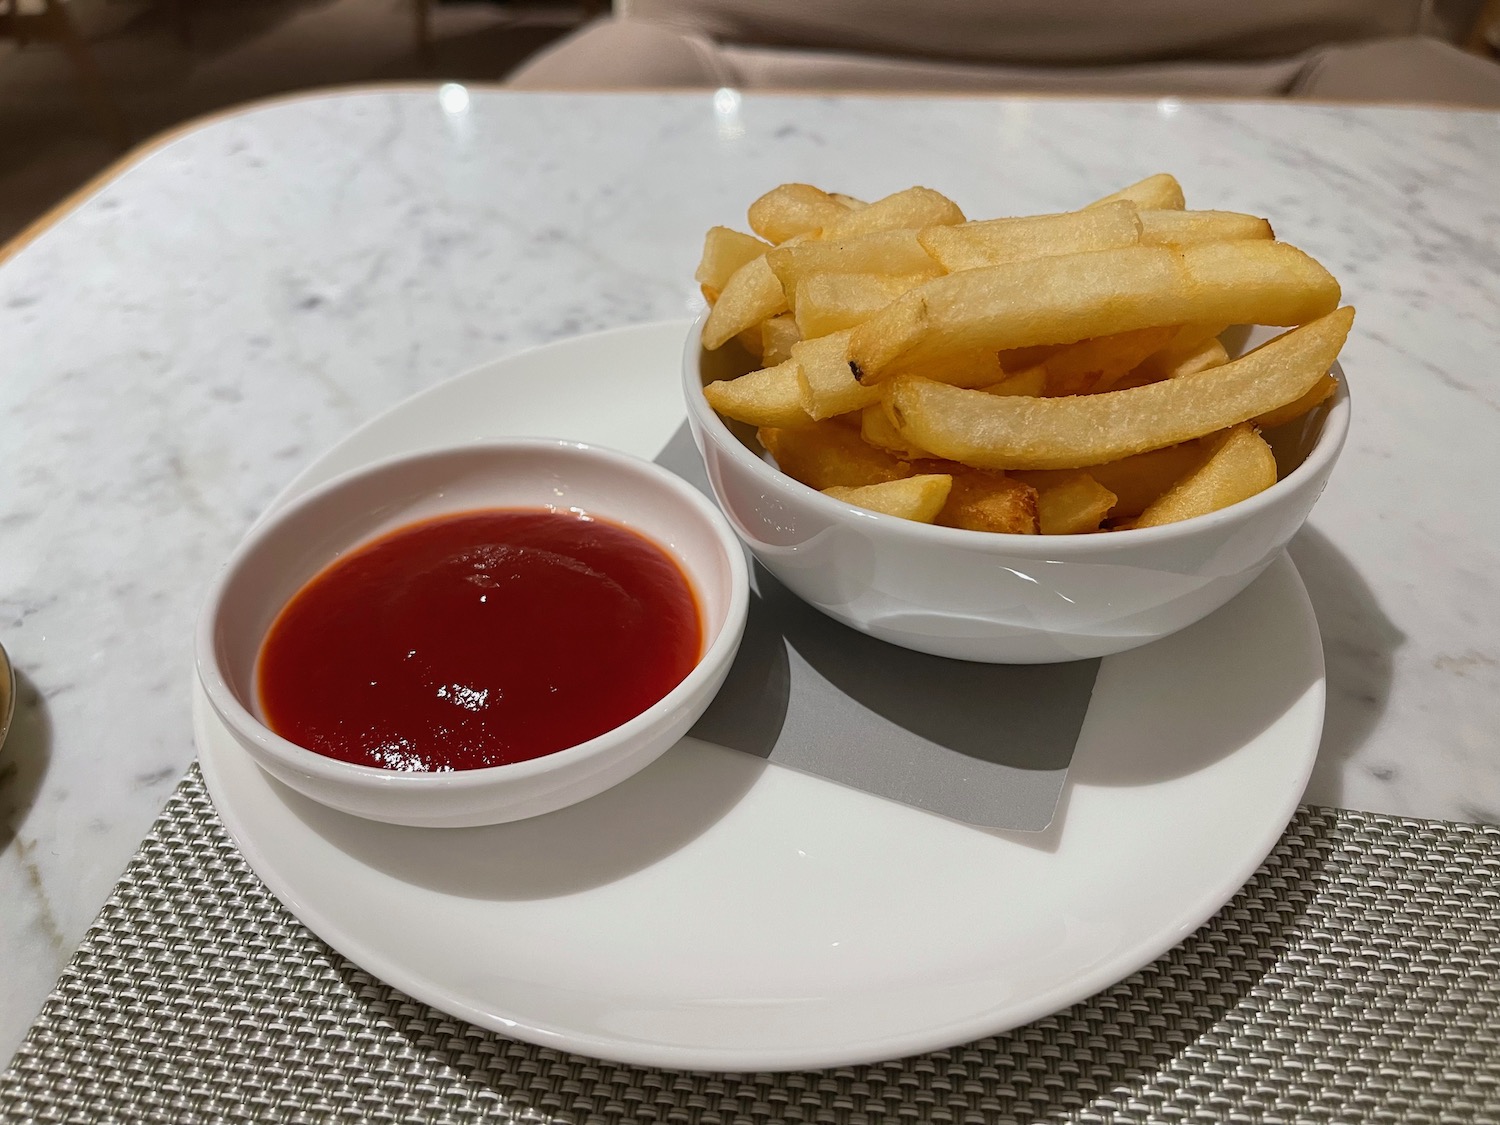 a bowl of french fries and ketchup on a plate